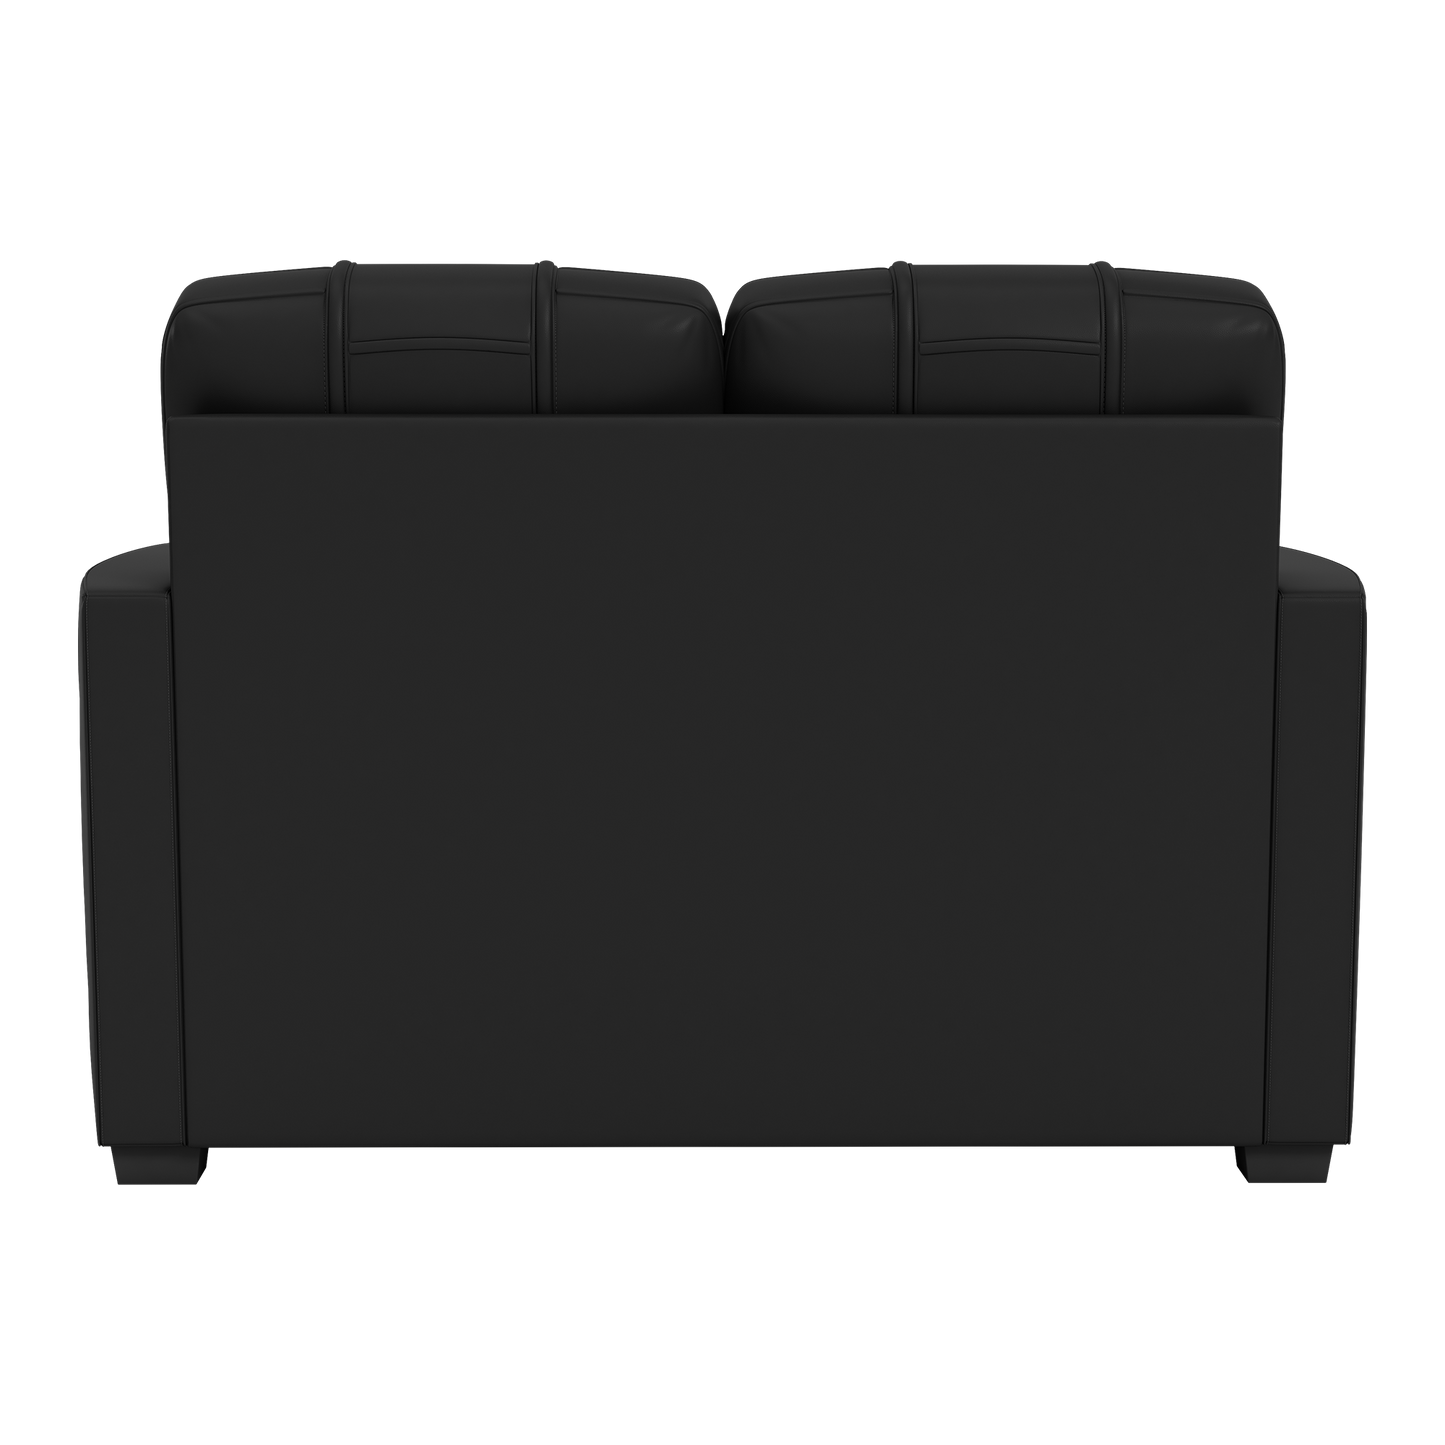 Silver Loveseat with Chevy Racing Logo